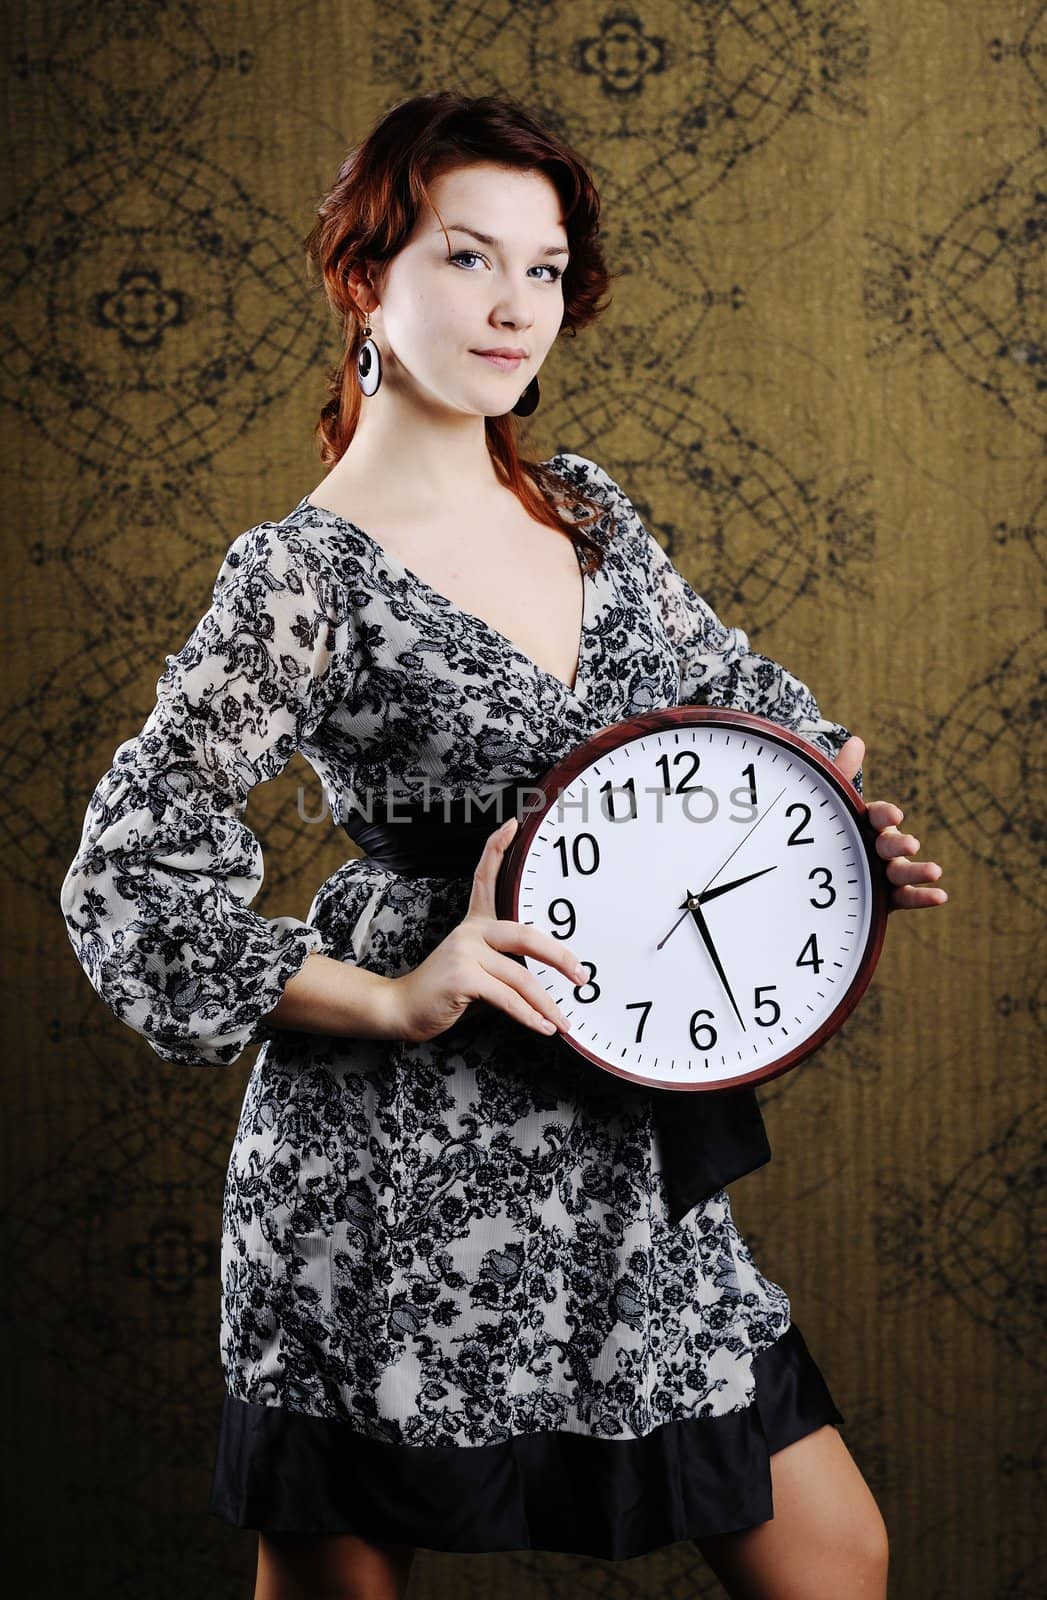 An image of a woman with a big clock